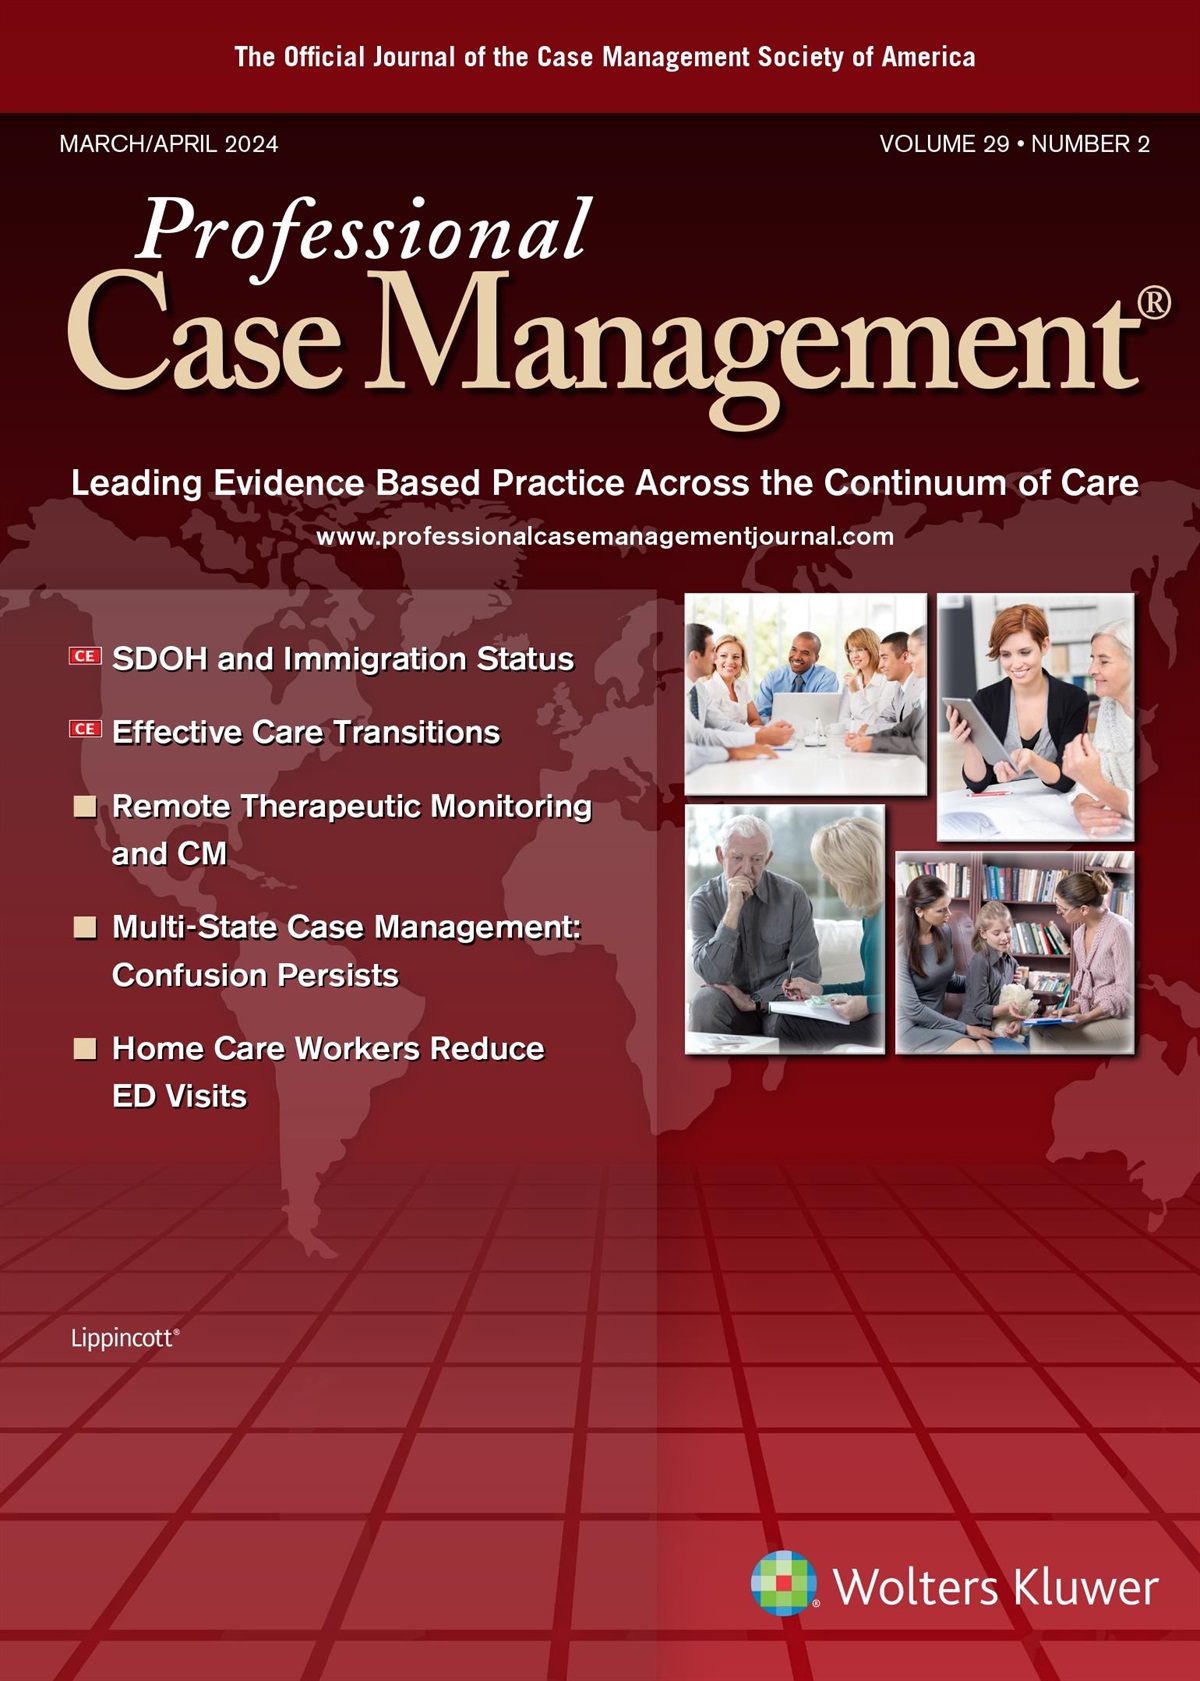 Effective Care Transitions: Reducing Readmissions to Improve Patient Care and Outcomes